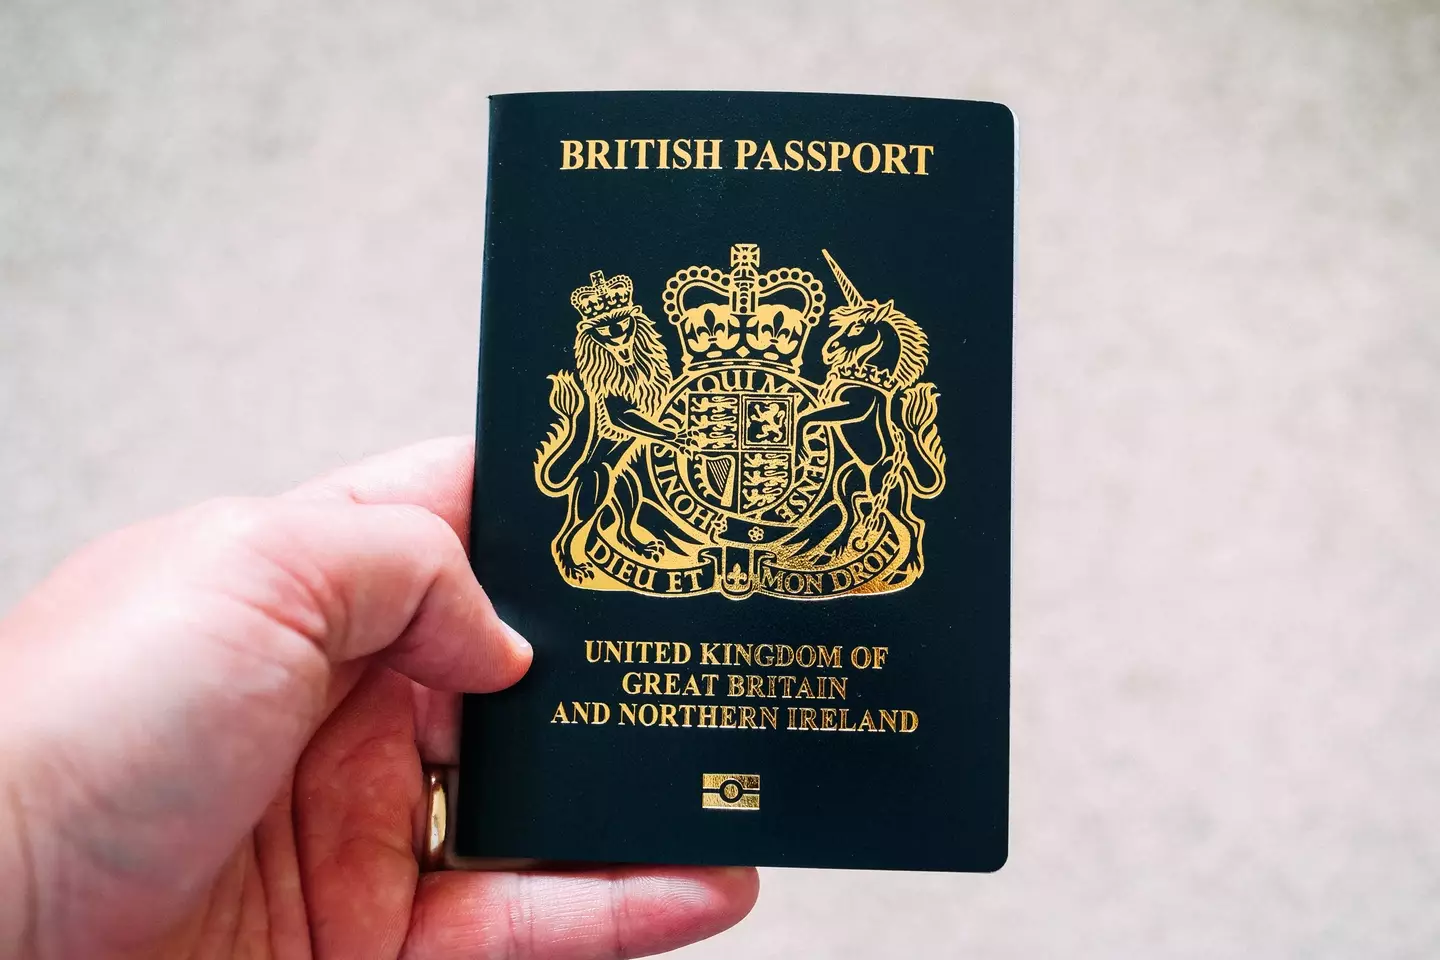 There’s more going on inside your passport than you may have realised.